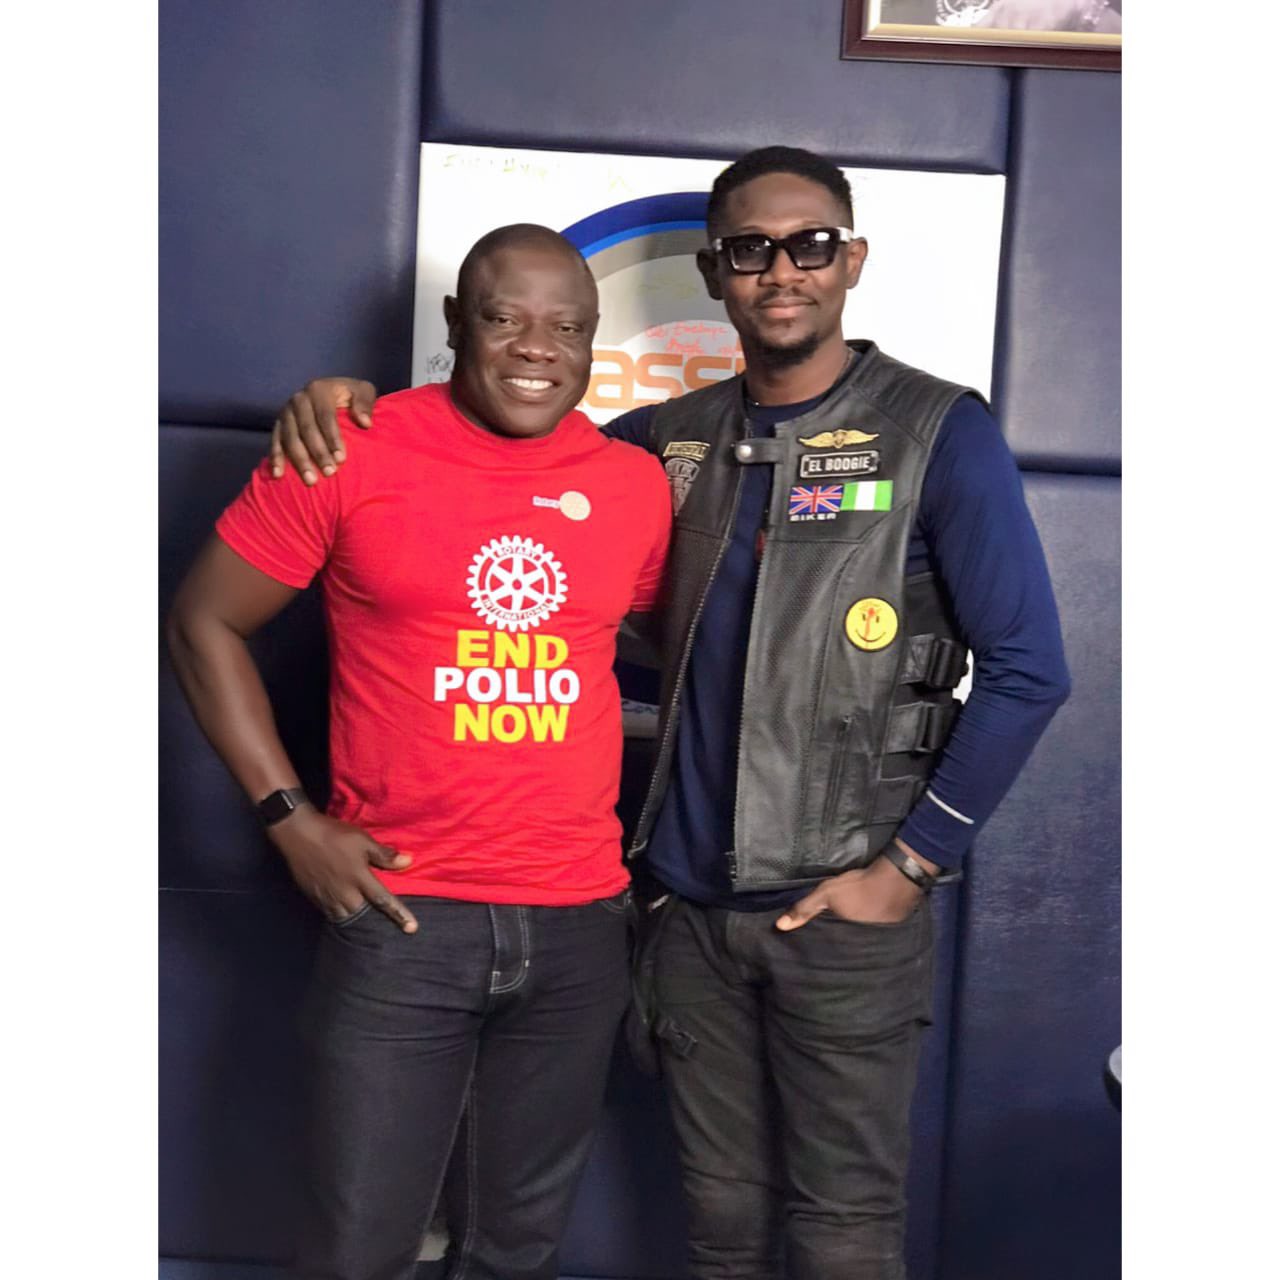 Kunle Adeyanju on X: With Lawrence at 97.3 Classic FM studio Ikoyi Lagos  Great guy… a fellow biker with positive vibes & passion! #EndPolio  #LionHeart #ThinkAfrica #LondonToLagos  / X